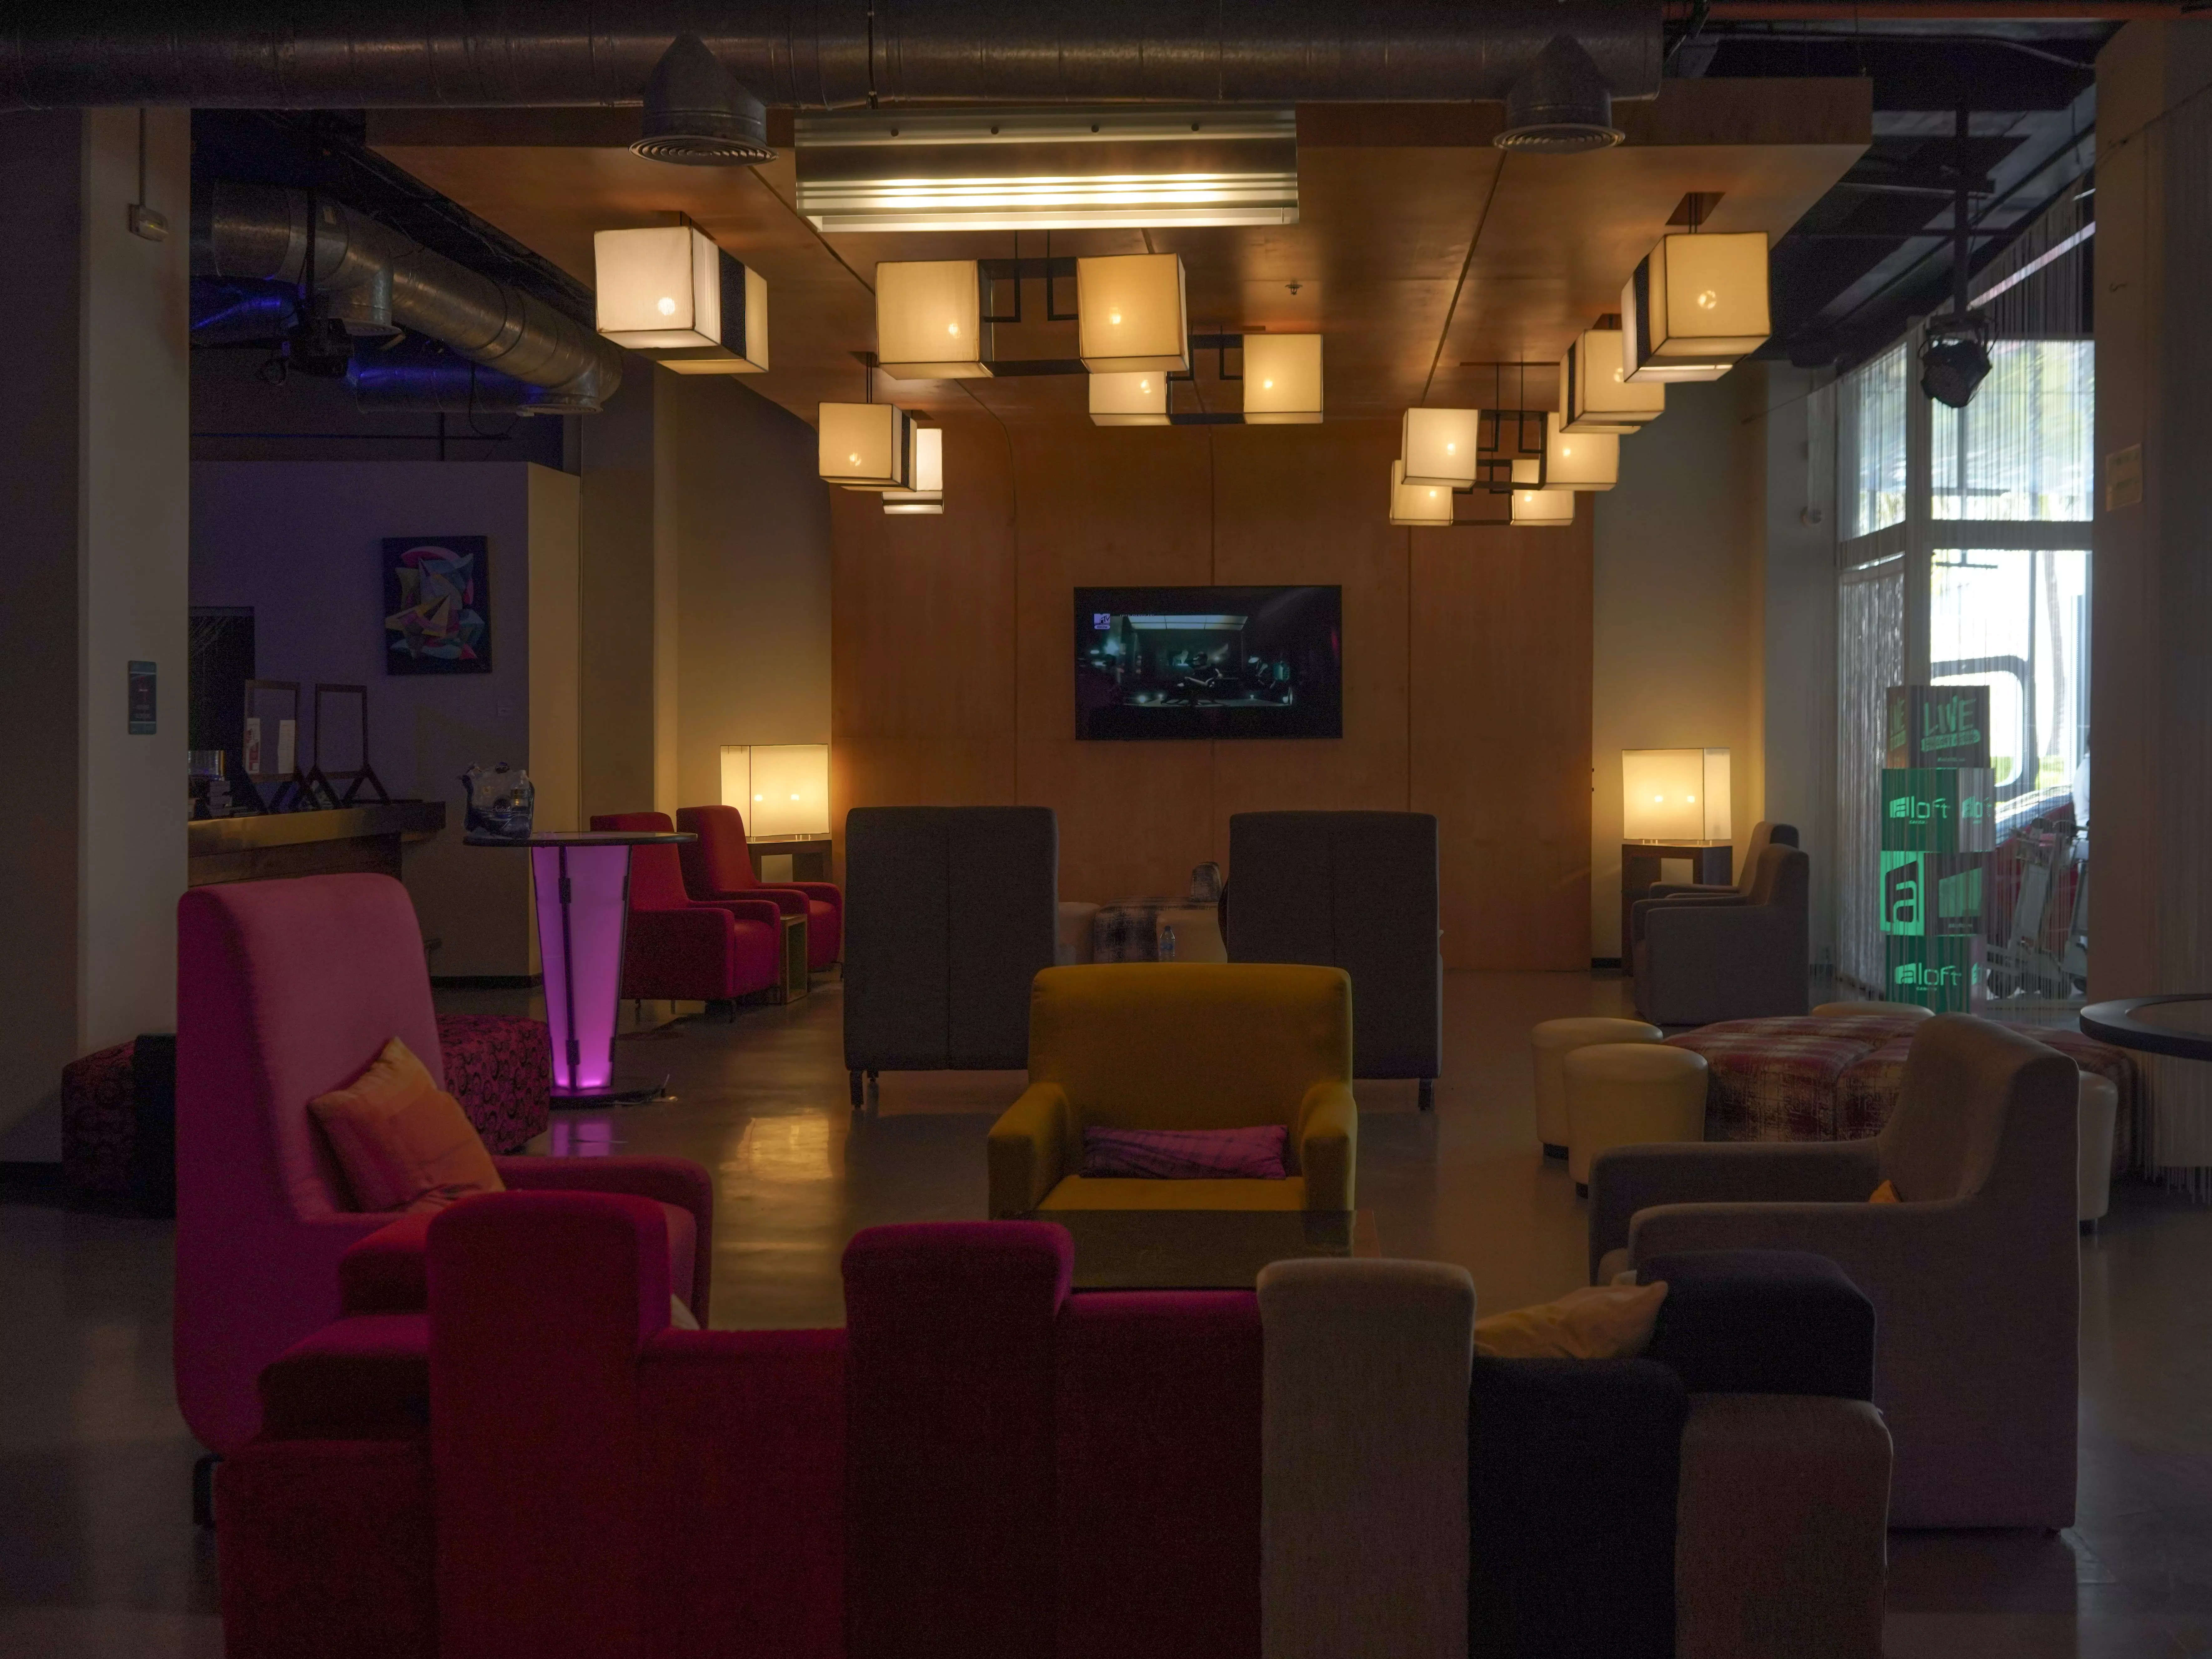 Aloft lounge with red and gray sofas, and overhead hanging lamps